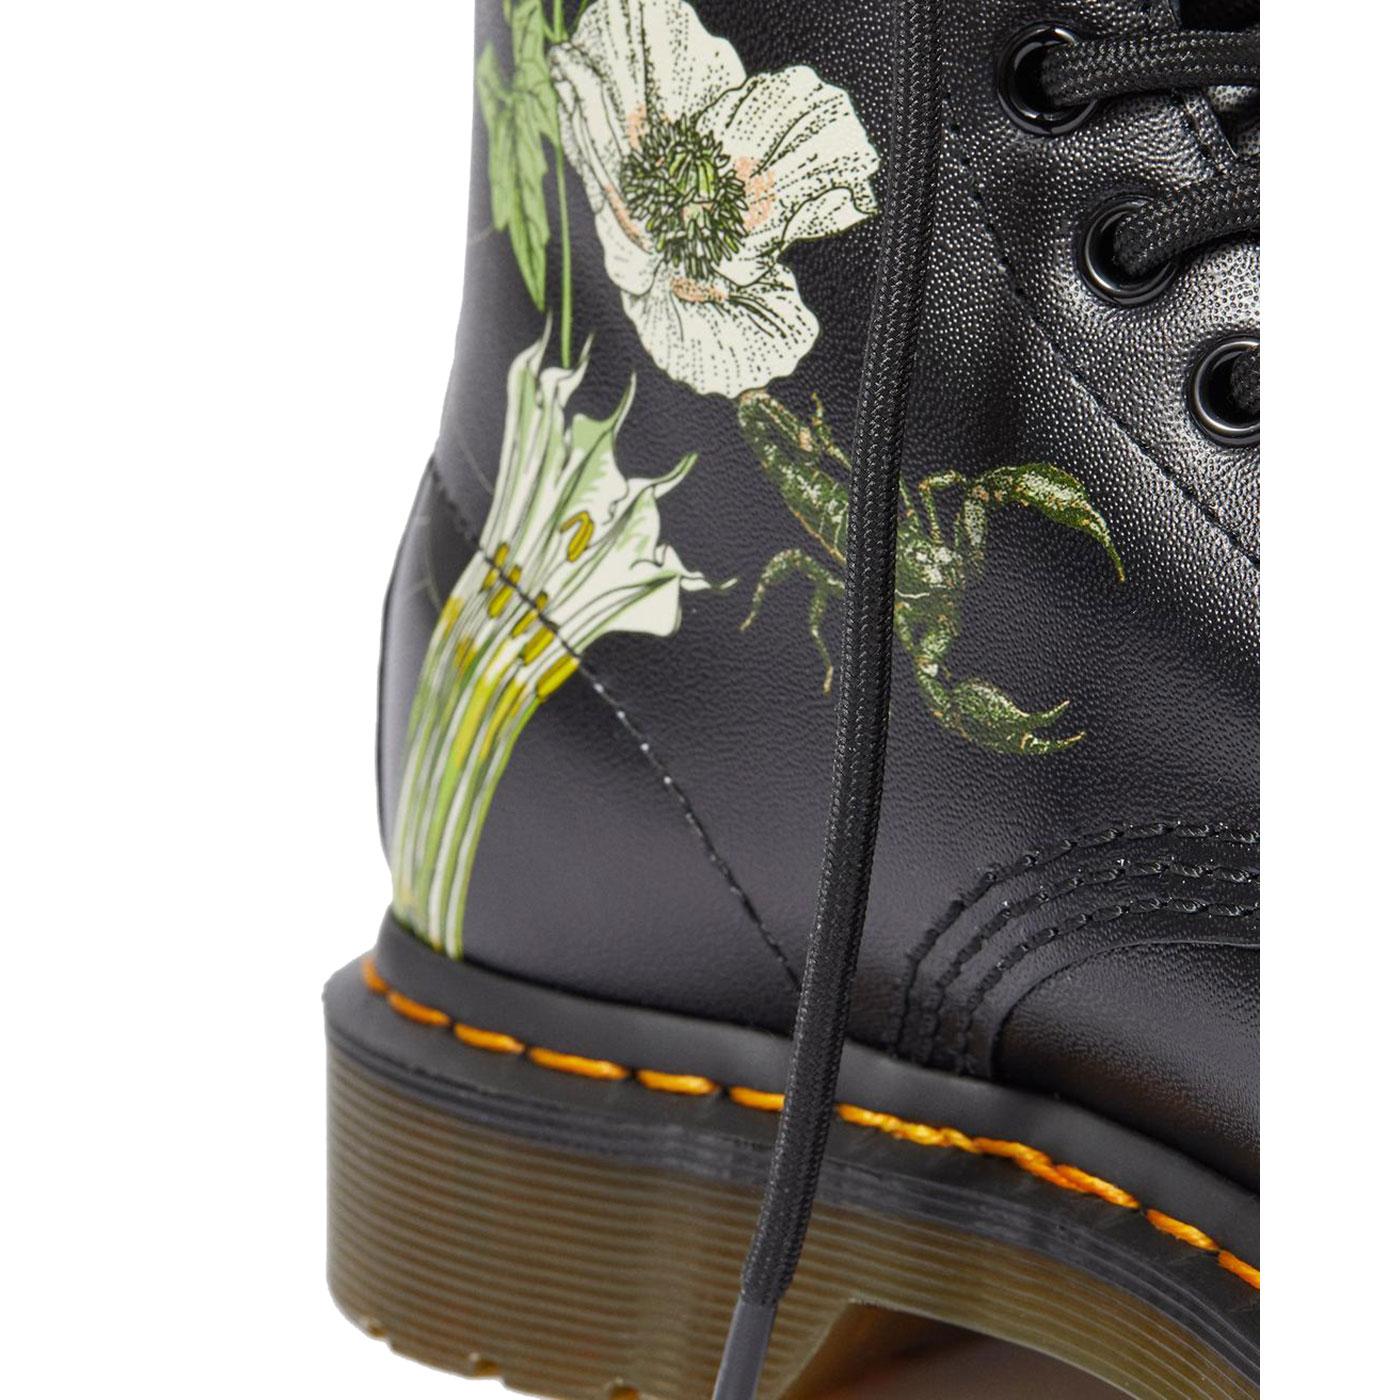 black doc martens with flowers